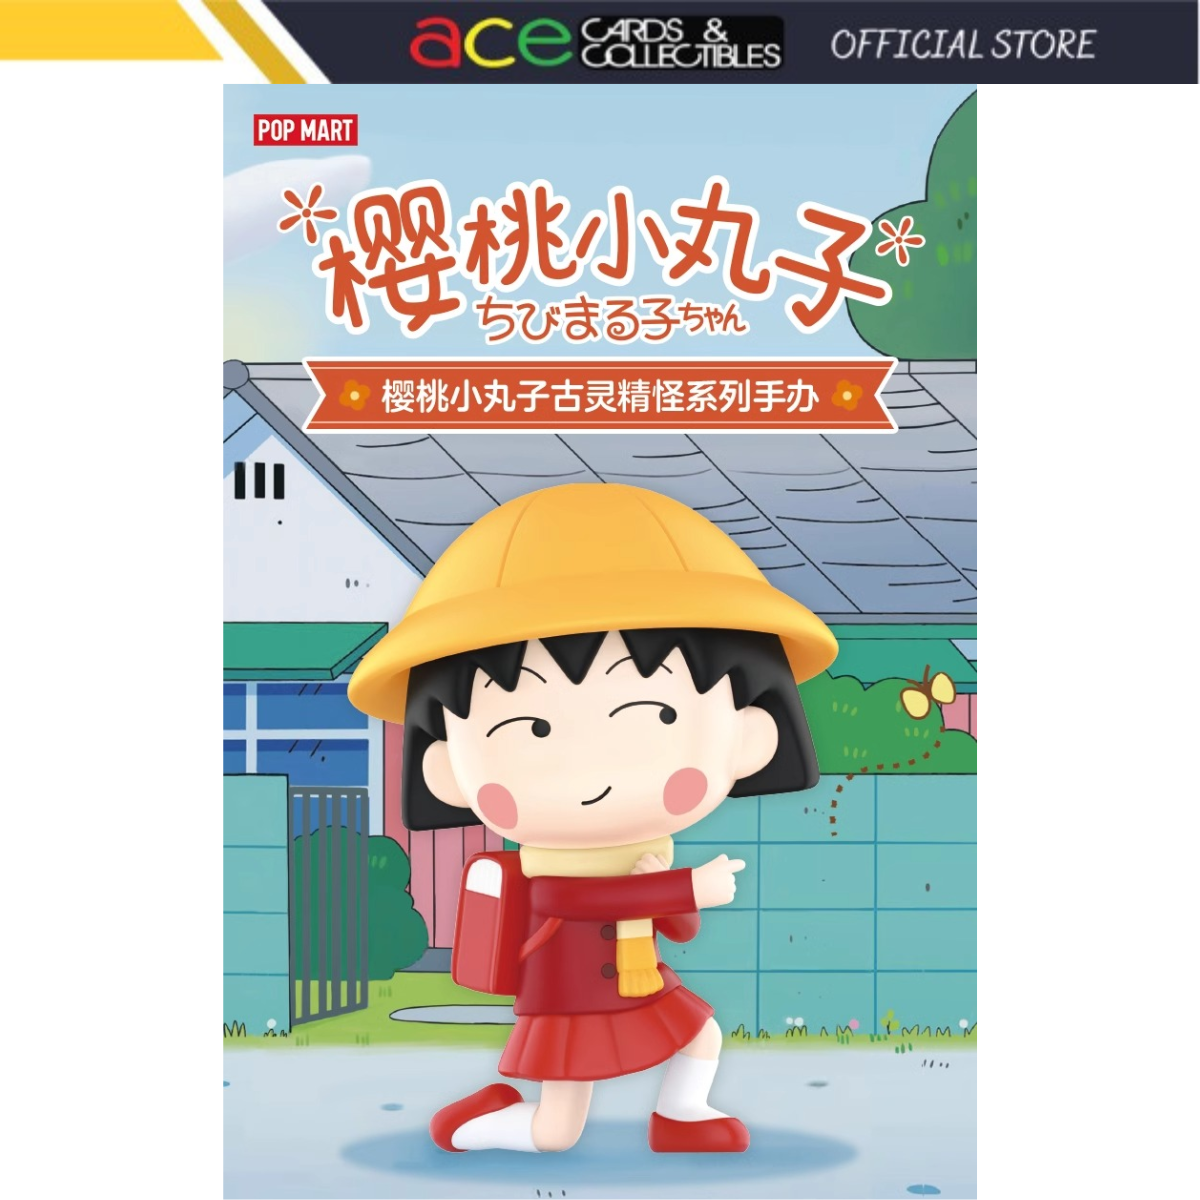 POP MART Chibi Maruko-chan&#39;s Quirky Adventures Series-Single Box (Random)-Pop Mart-Ace Cards &amp; Collectibles